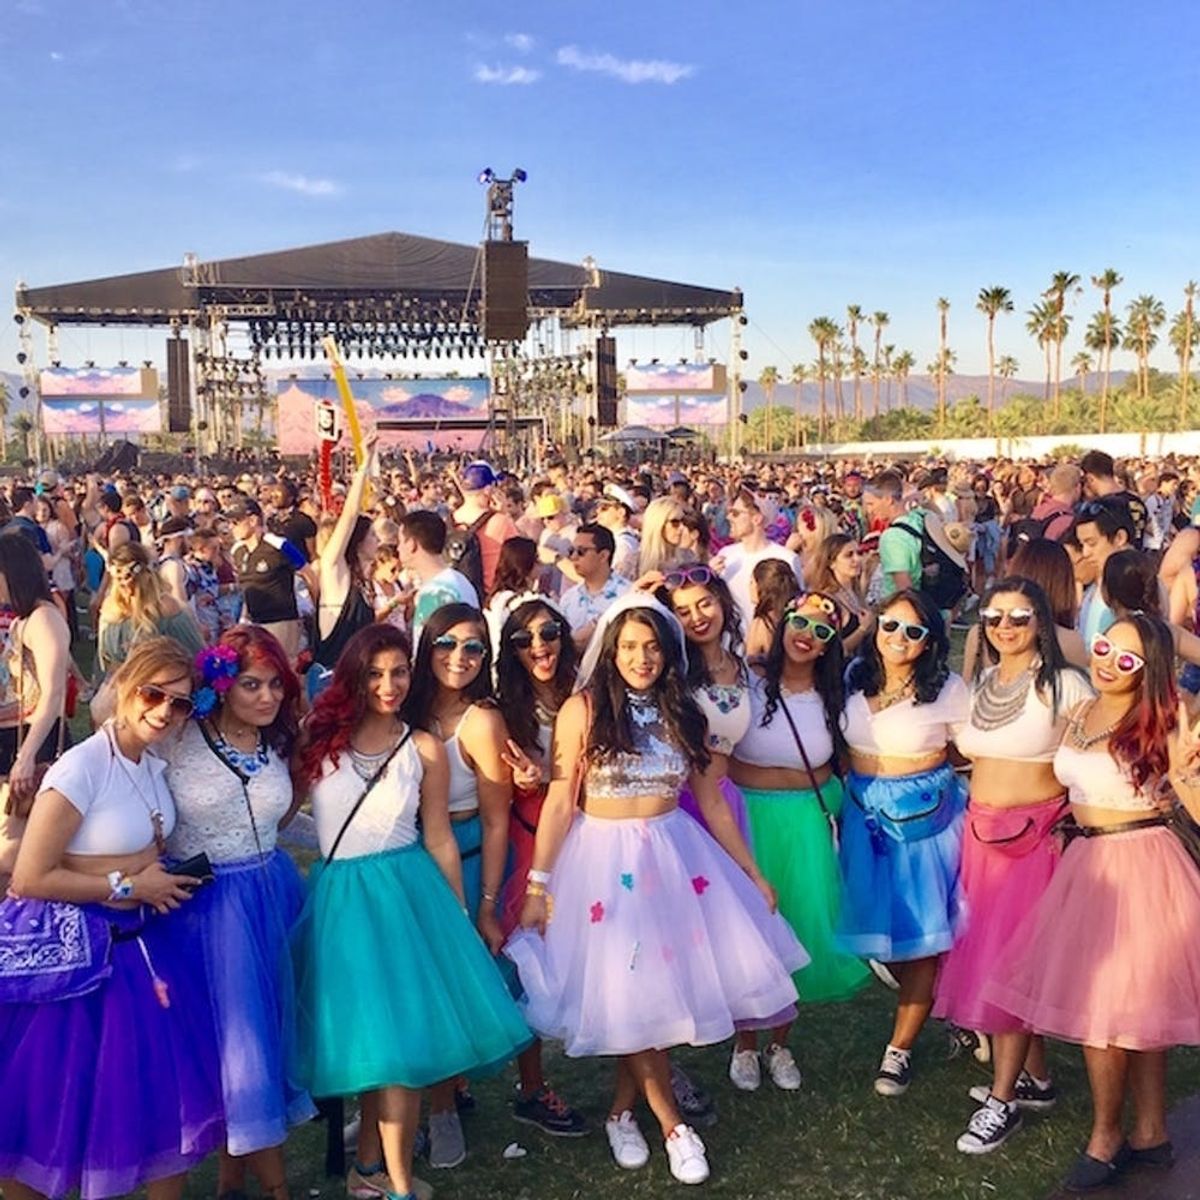 This Girl Had Her Bachelorette Party at Coachella and We’re Mad We Didn’t Think of It First